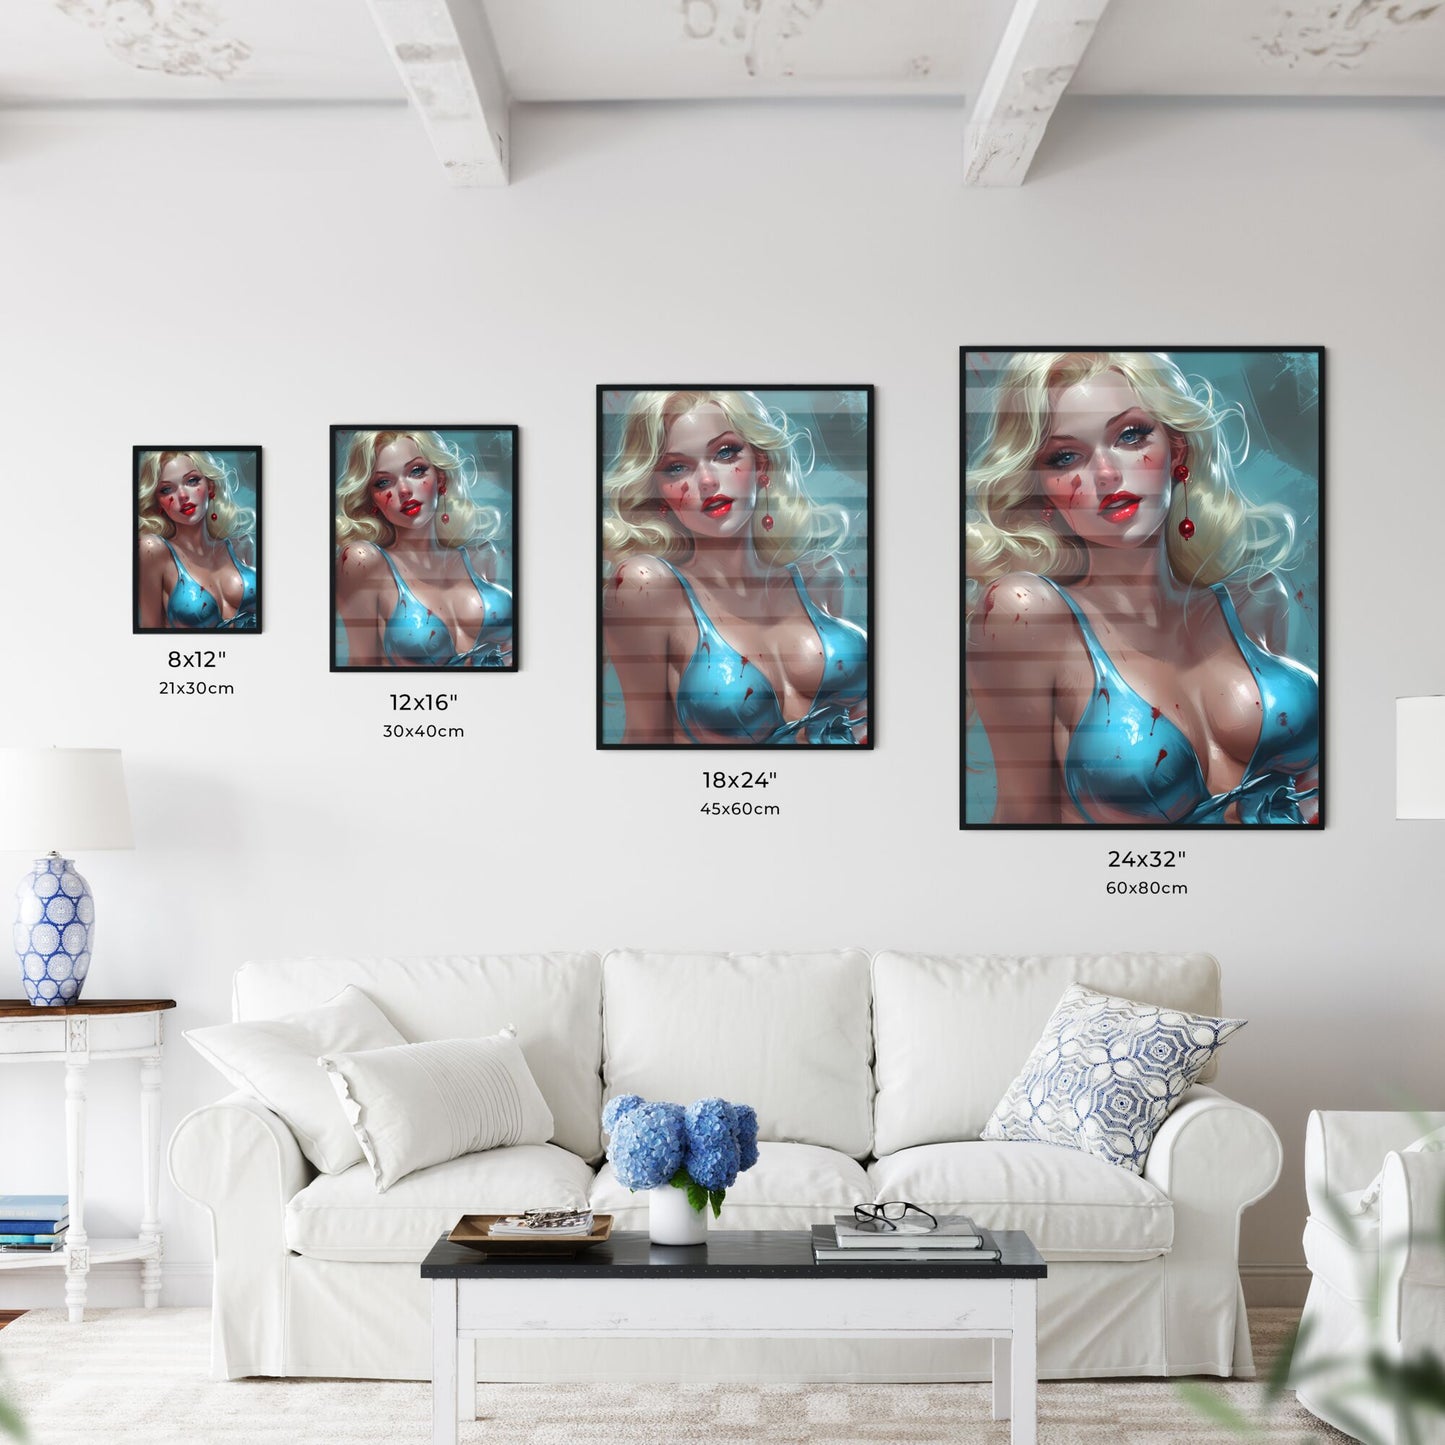 Pin up girl - Art print of a woman with red lipstick and earrings Default Title